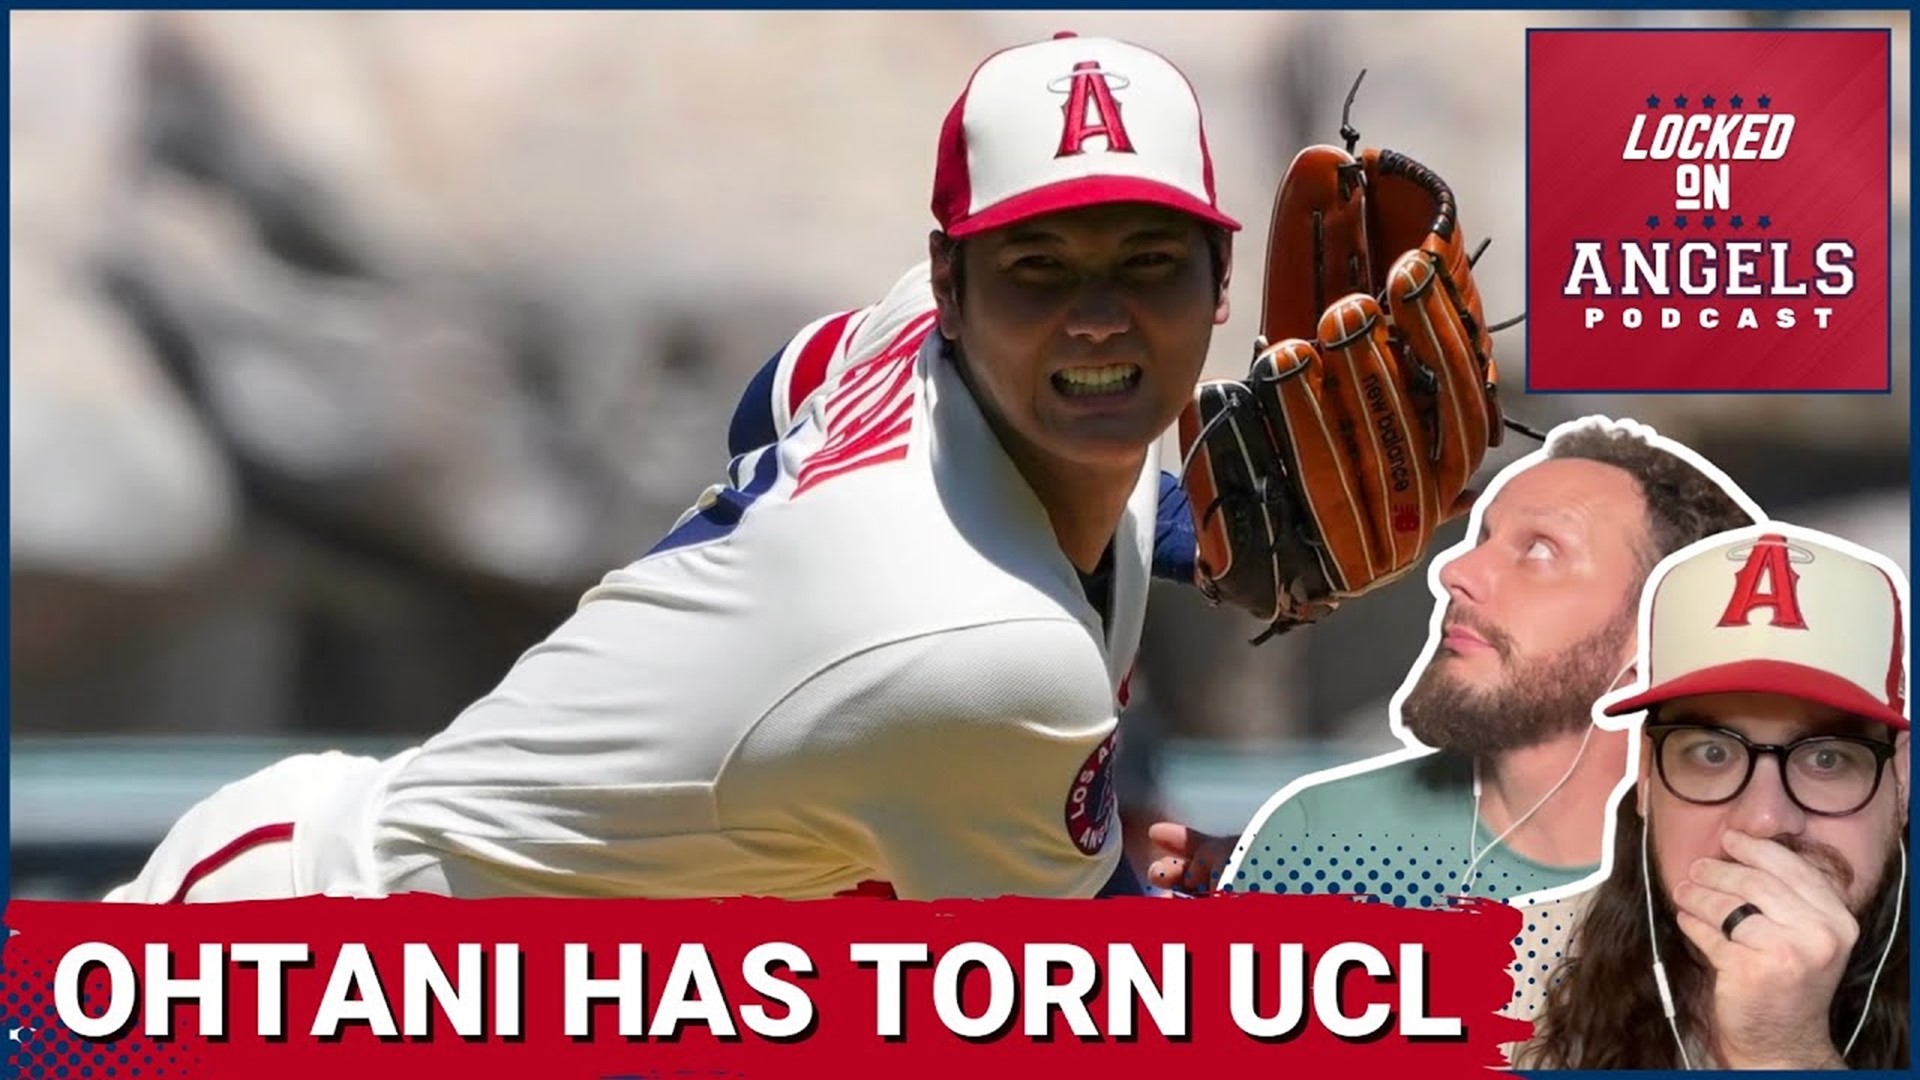 MLB - It's Sho time. The Angels have activated Shohei Ohtani.